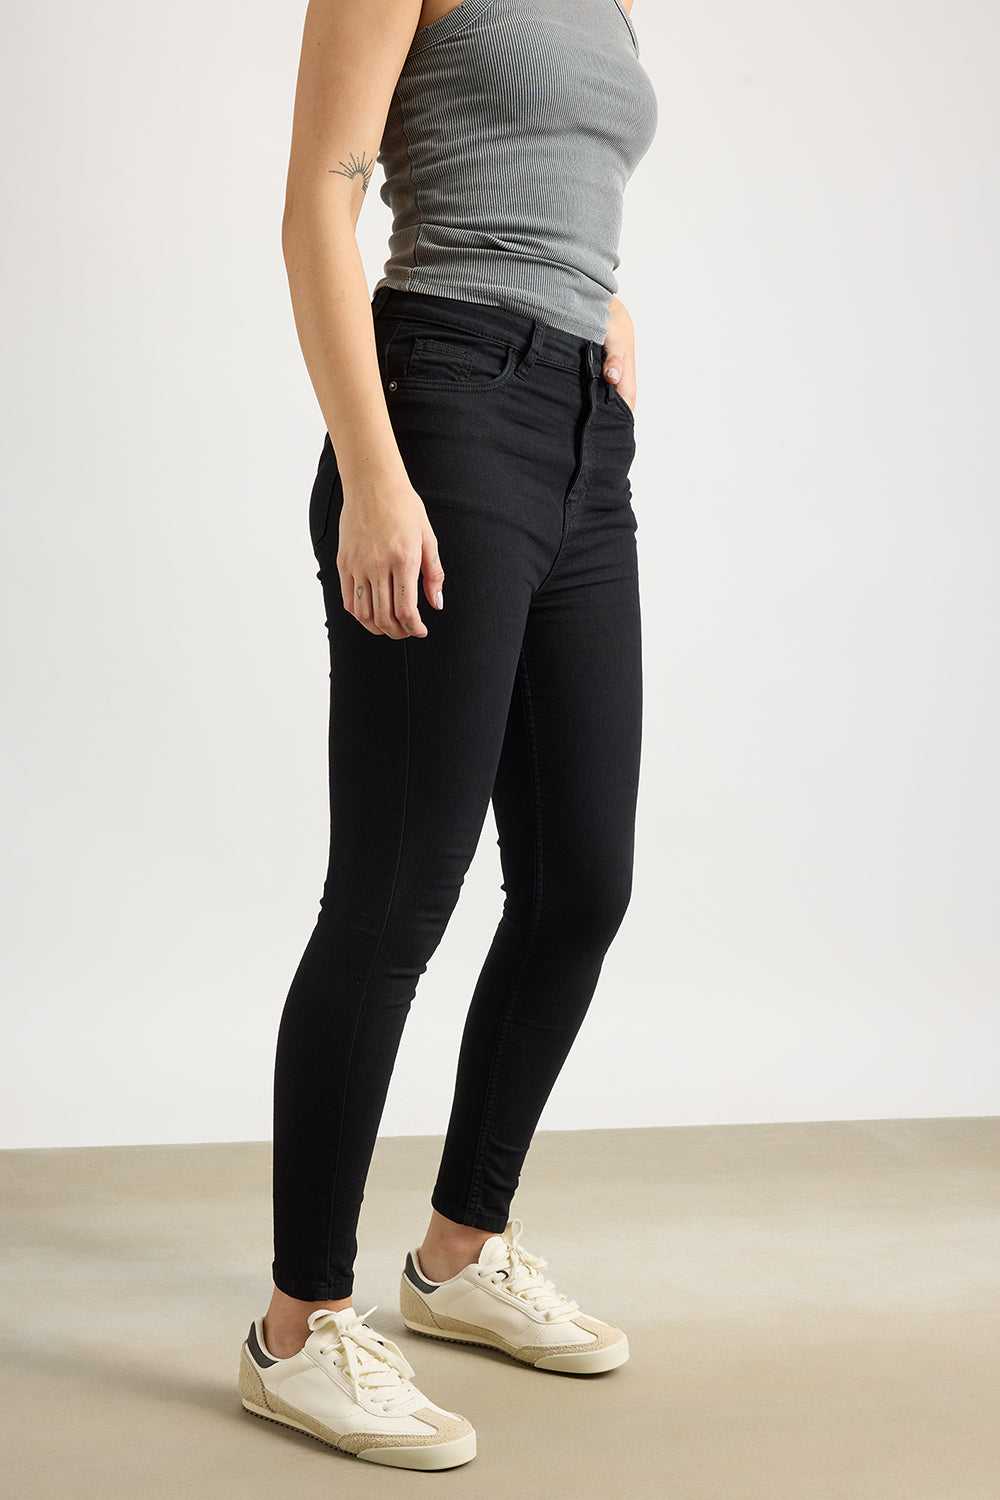 CARBON SKINNY FIT JEANS